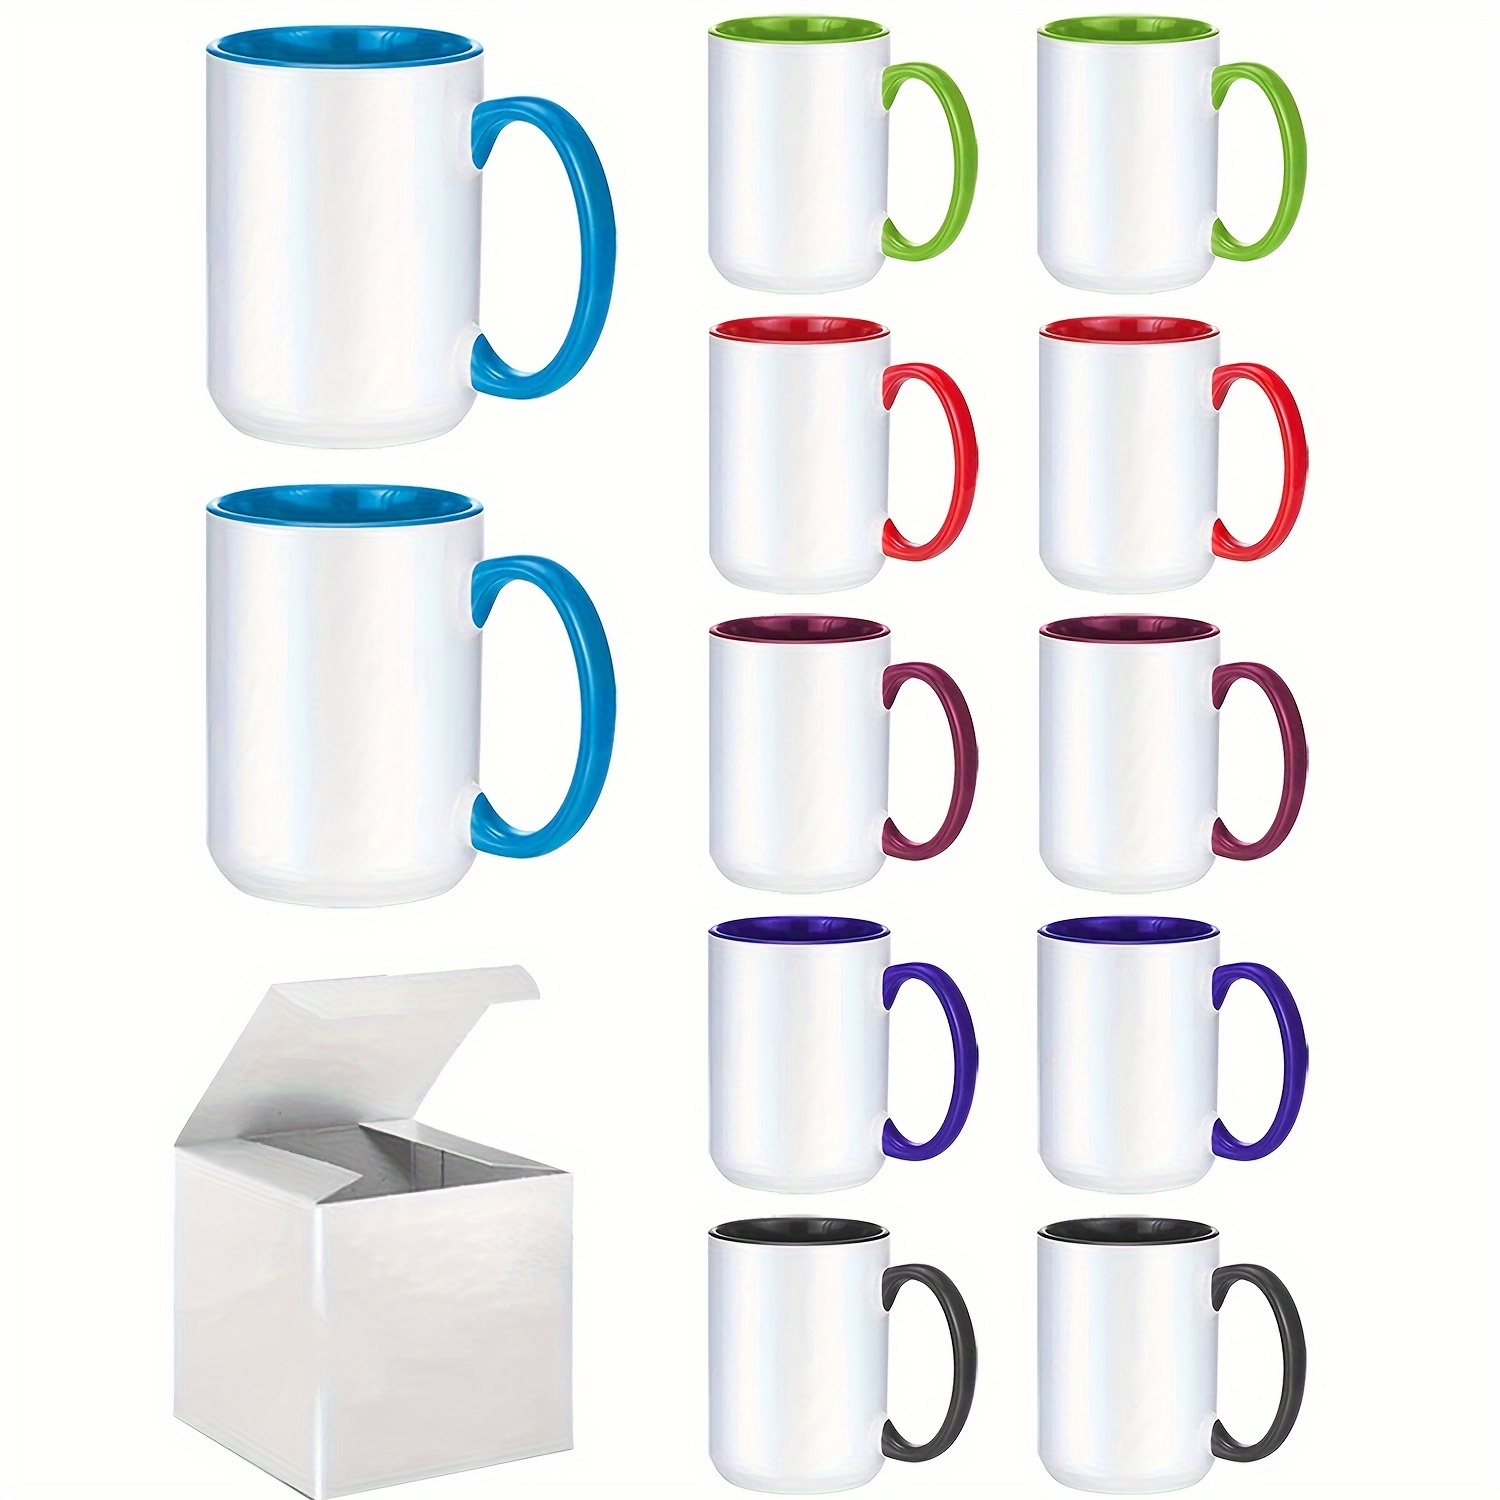 

12pack Sublimation Color Mugs 11oz Or 15oz With White Box